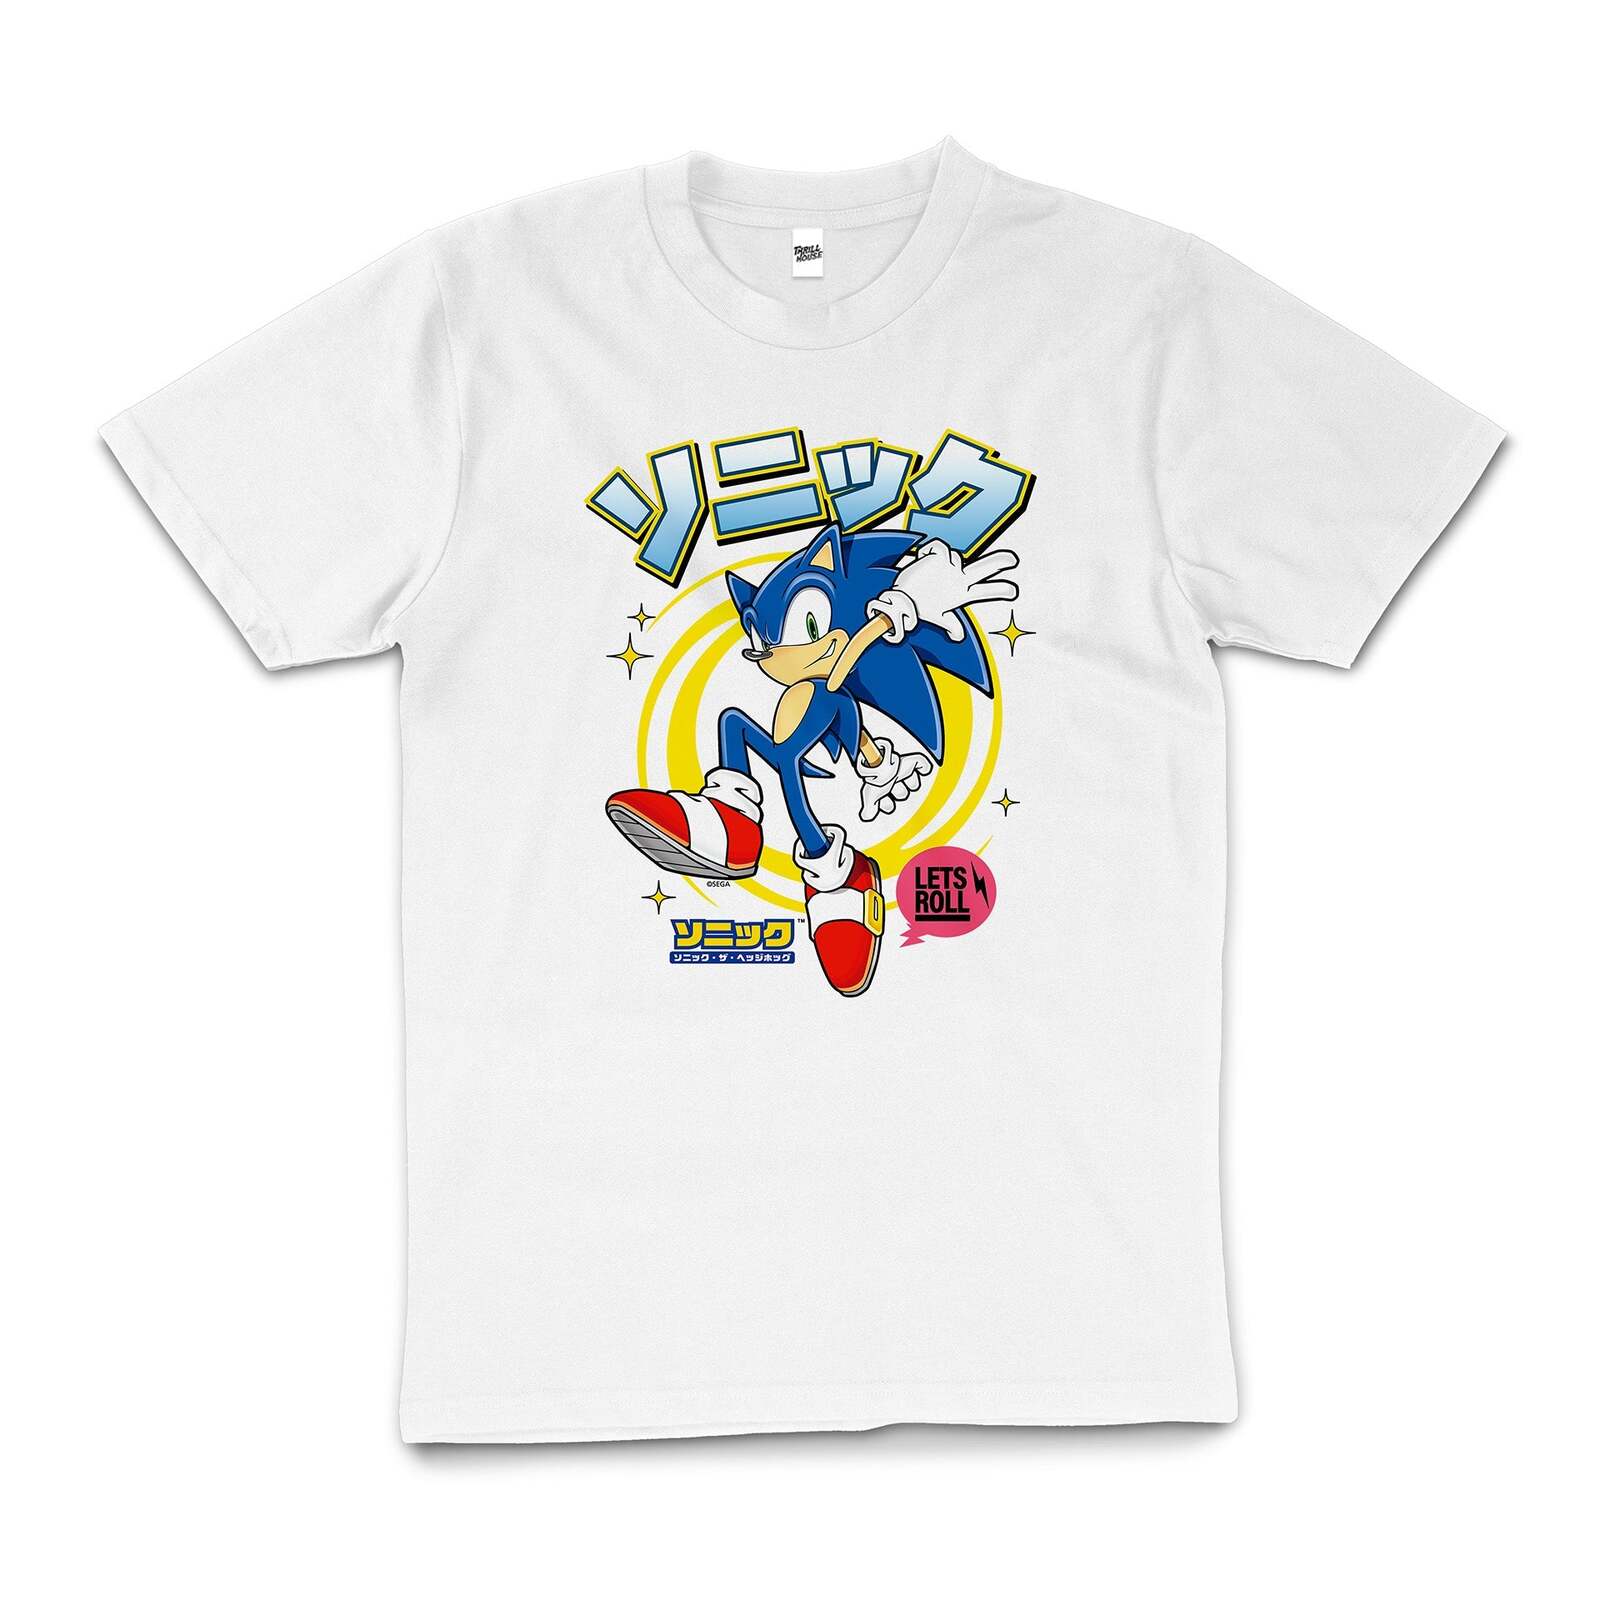 Sonic The Hedgehog Hyper Sonic 90s Game Cotton T-Shirt White Size M